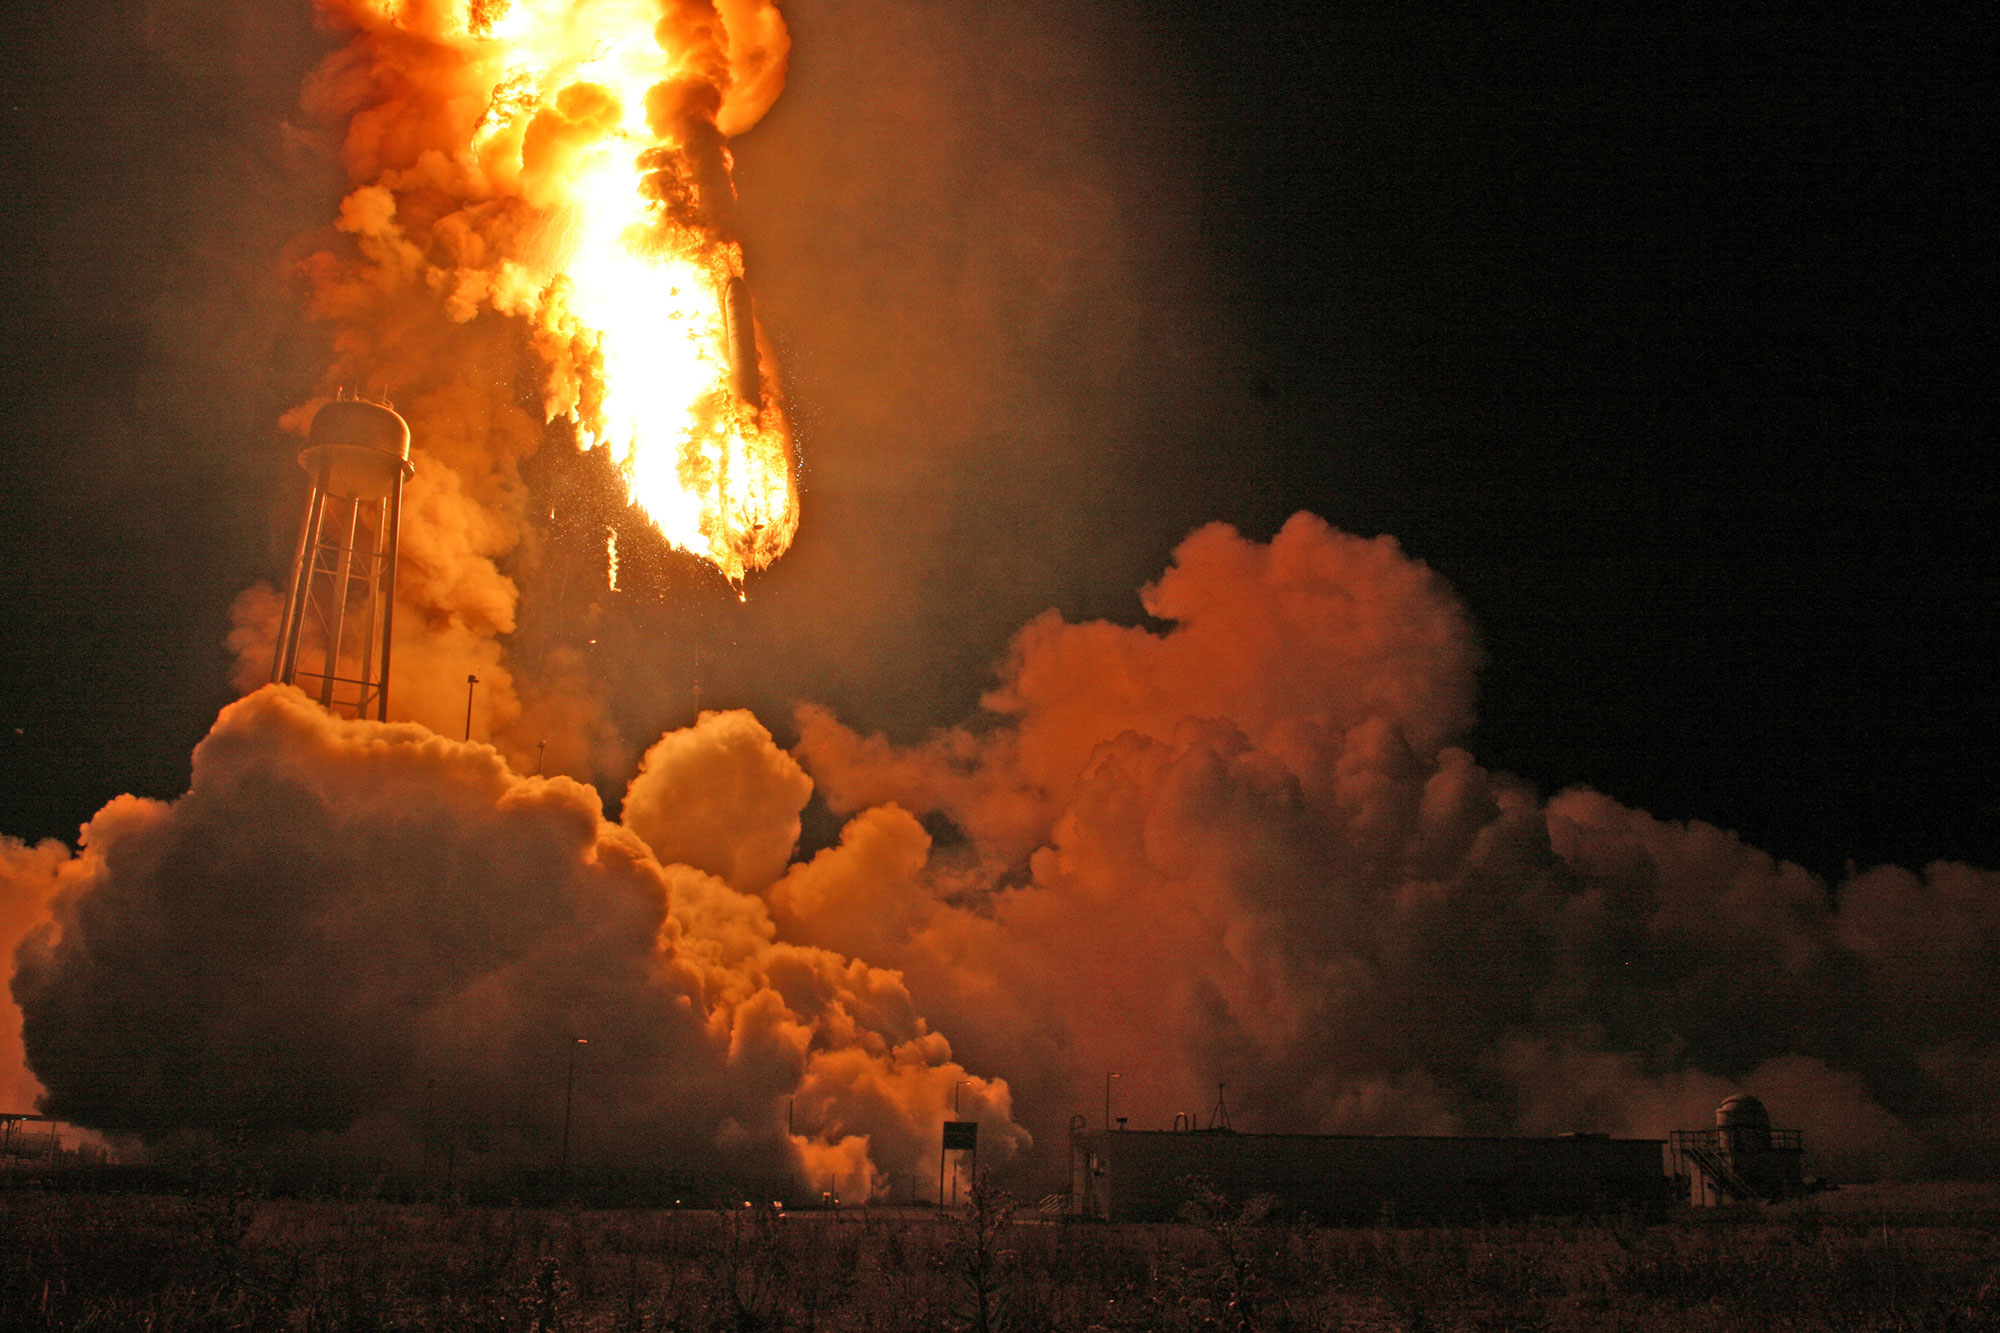 An Orbital Sciences Antares rocket descended into hellish inferno after the first stage propulsion system exploded moments after liftoff from the NASA’s Wallops Flight Facility along the Atlantic seaboard in Virginia. Credit: Ken Kremer